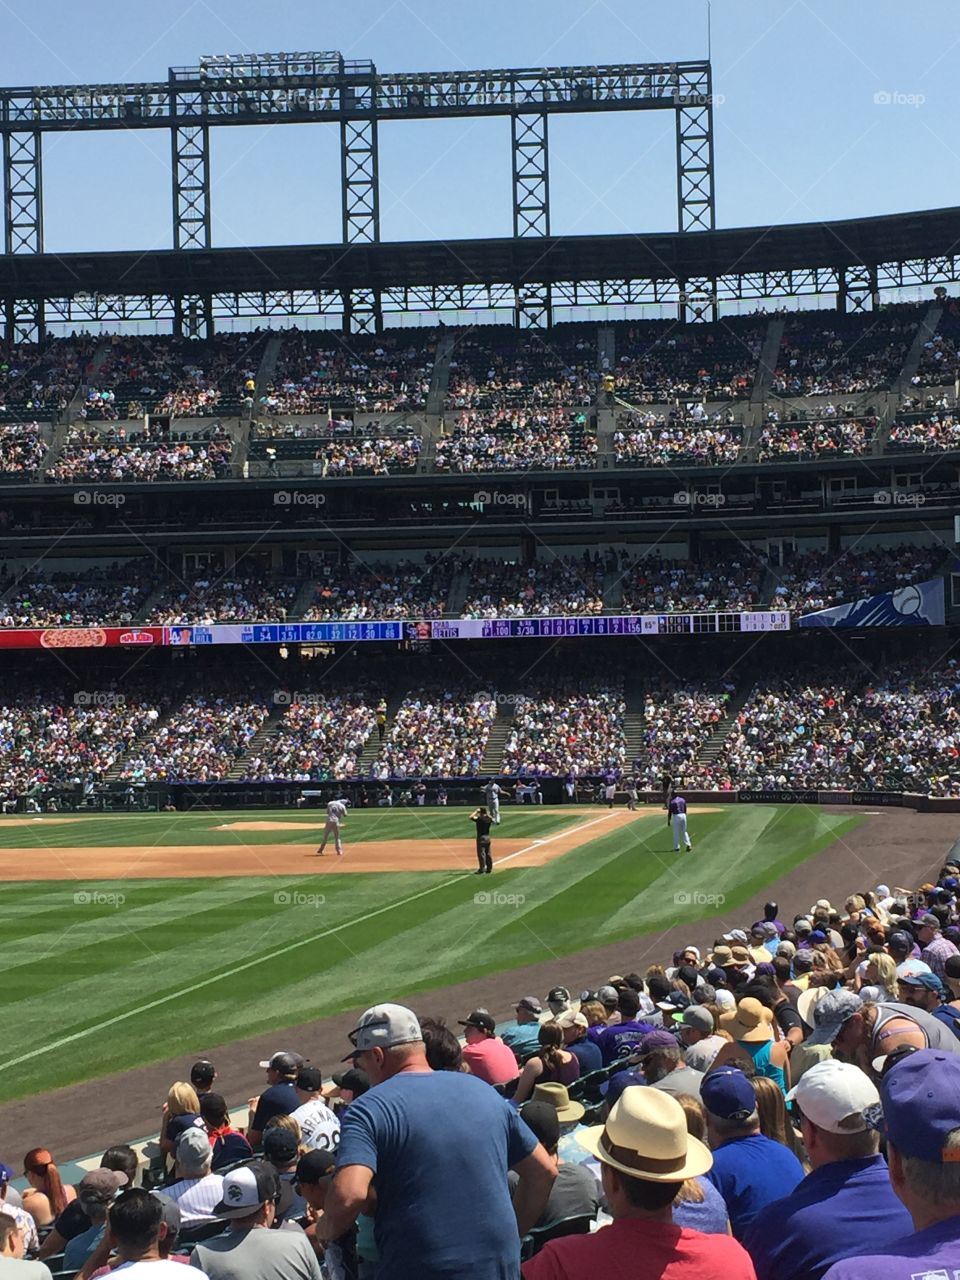 A Day at the ballpark - Coors Field